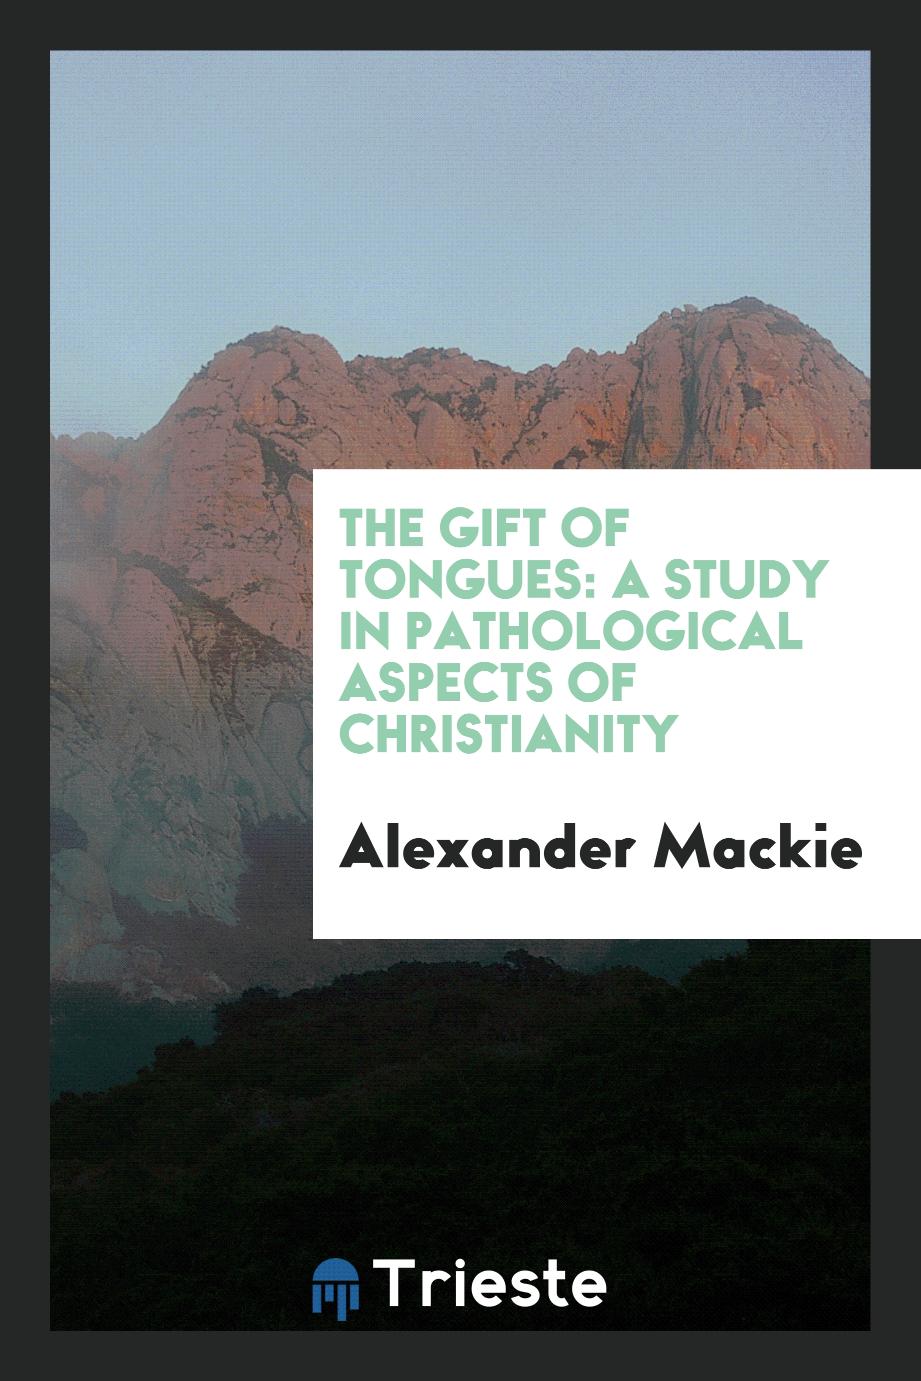 The gift of tongues: a study in pathological aspects of Christianity